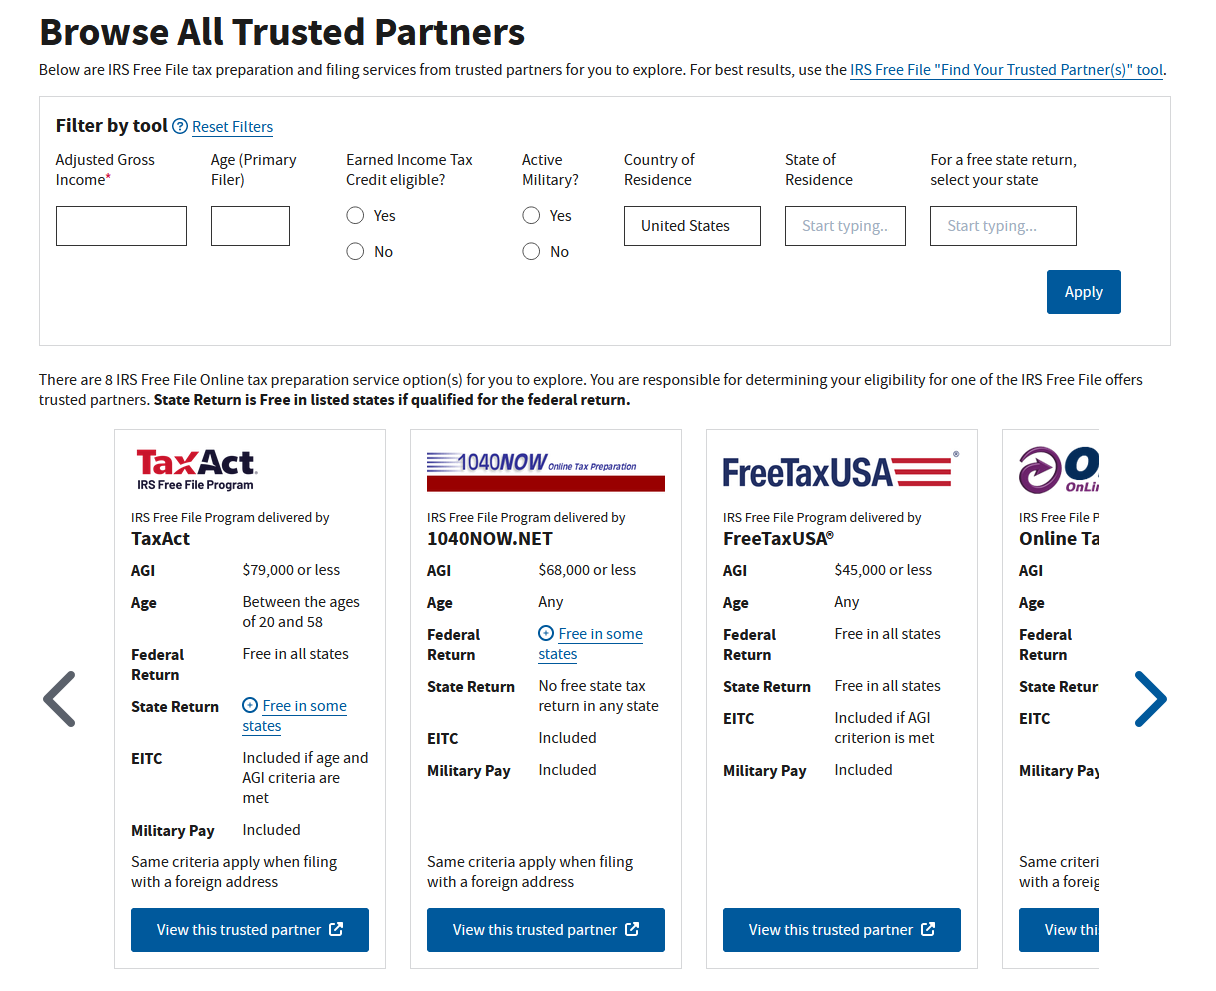 The IRS website showing trusted partners for online tax preparation including TaxAct, 1040NOW, FreeTaxUSA